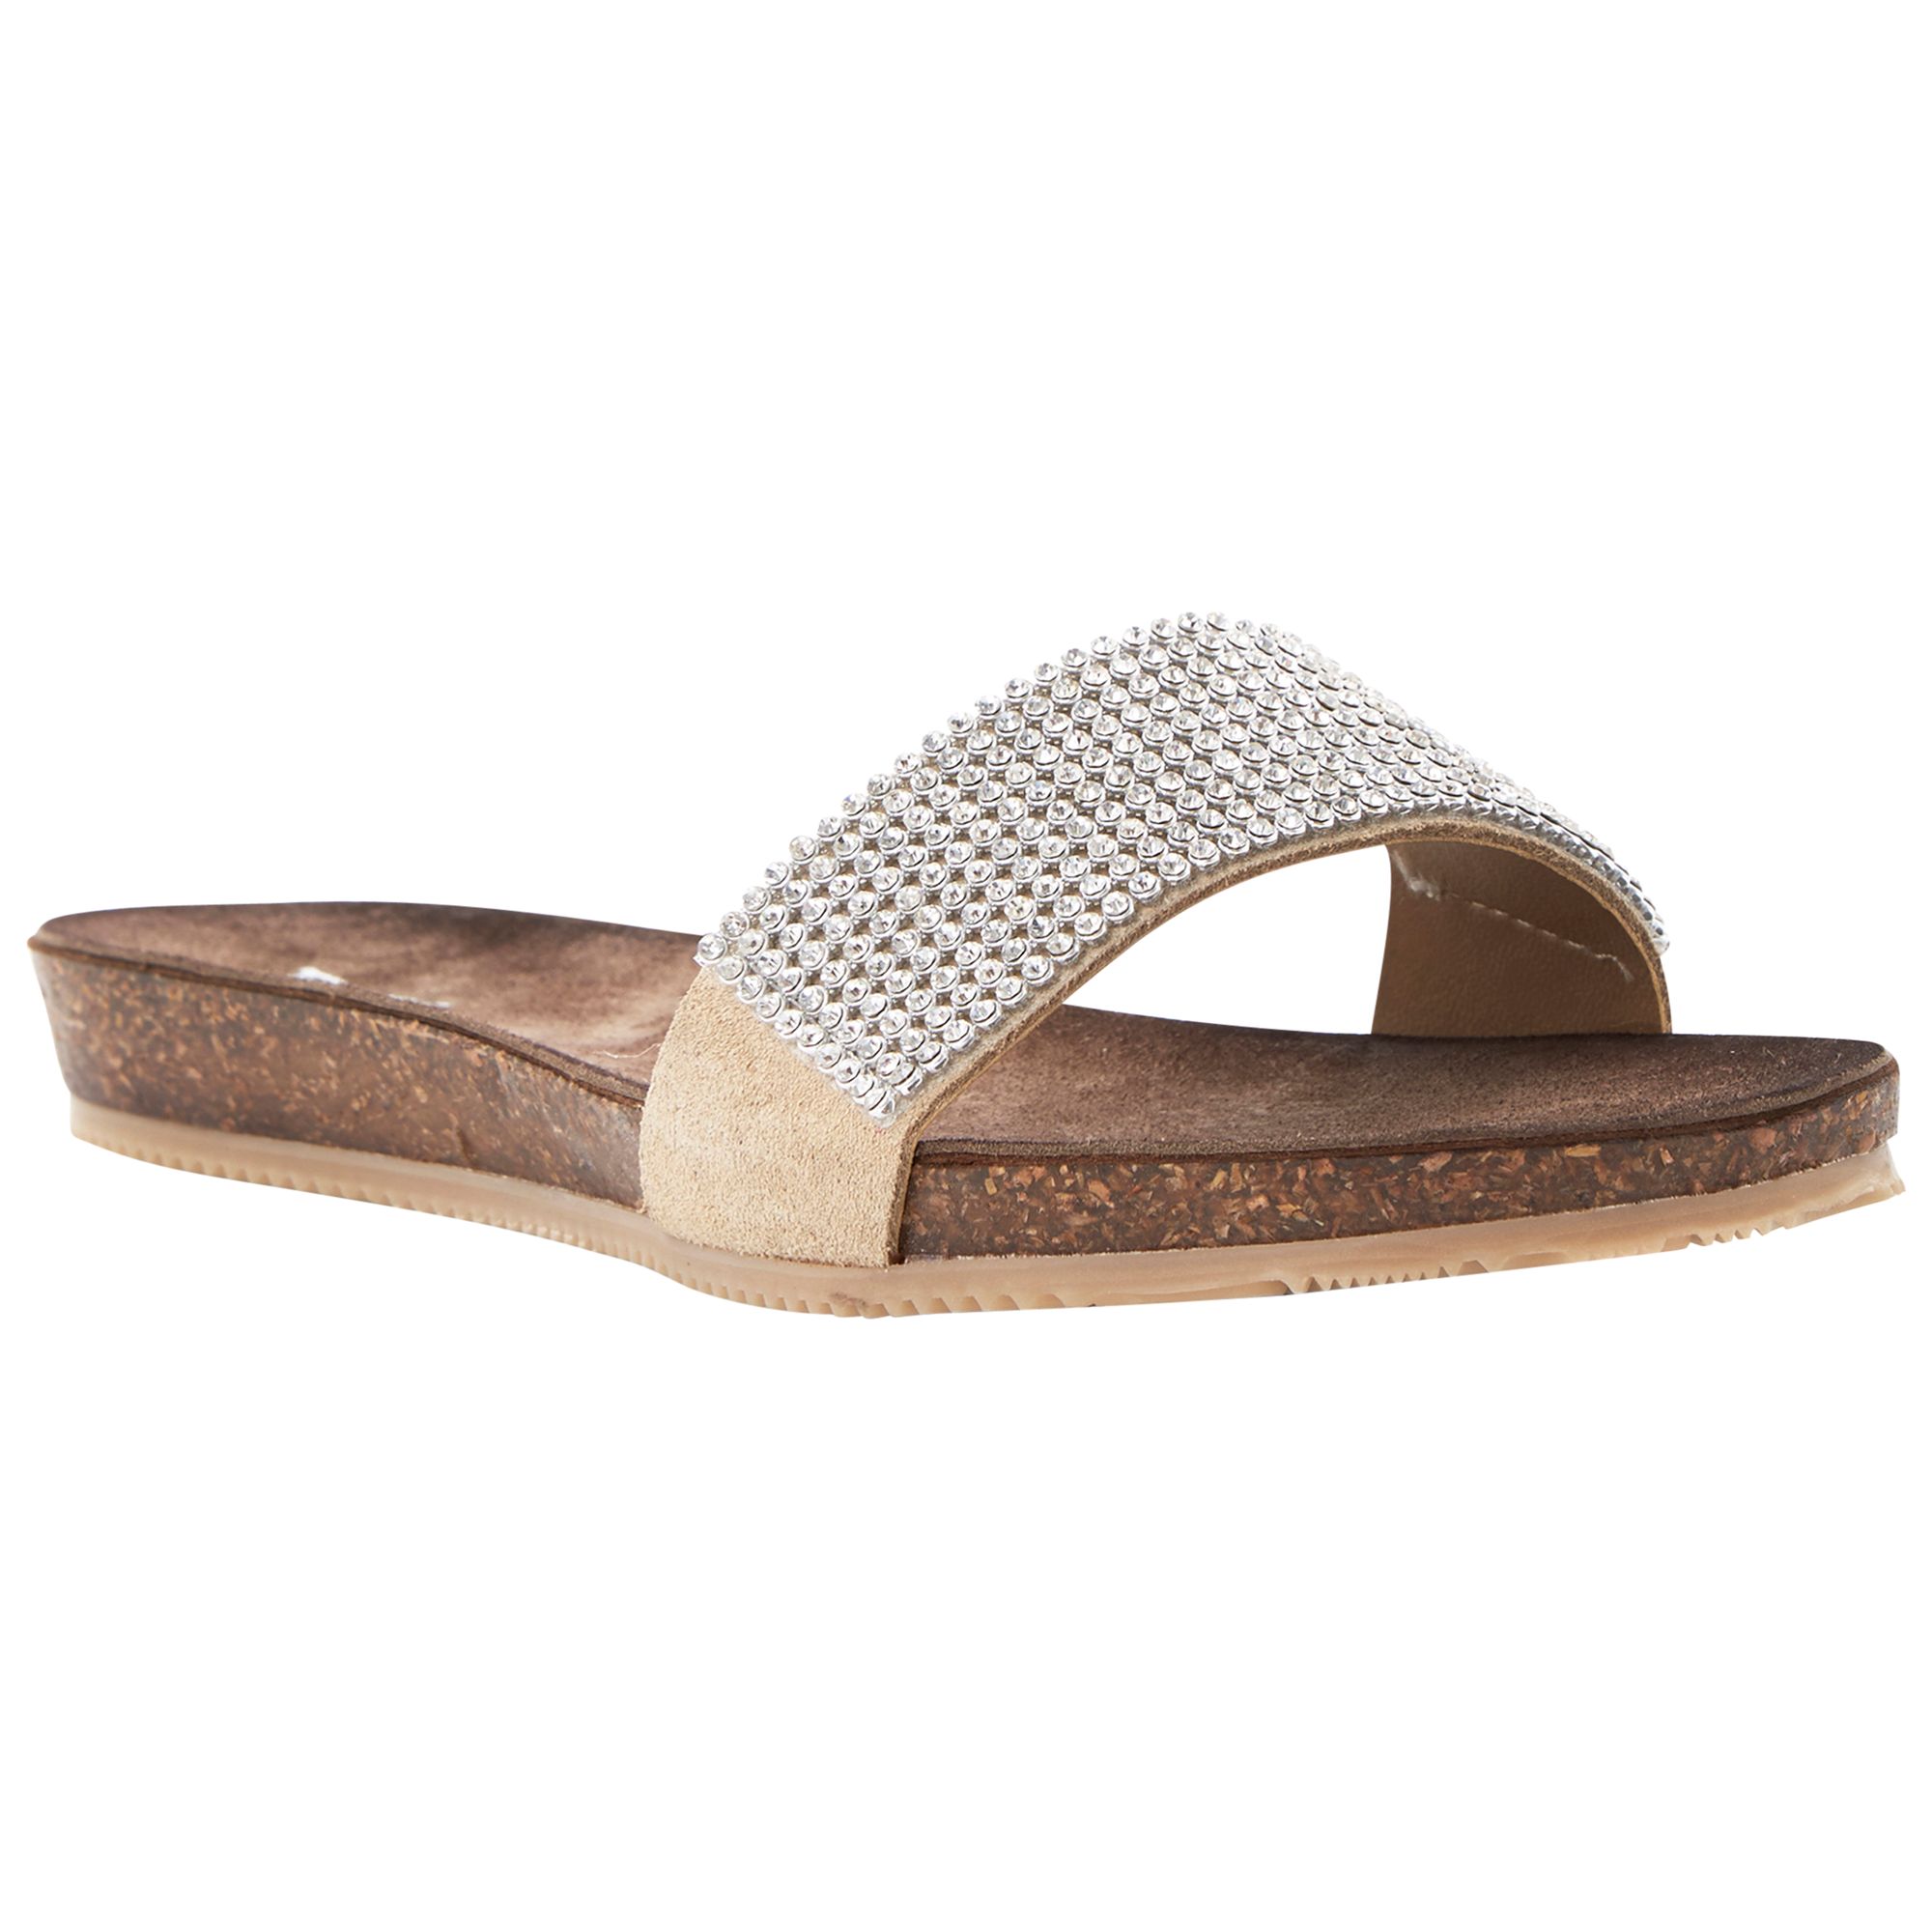 Dune Jling Leather Sandals, Nude